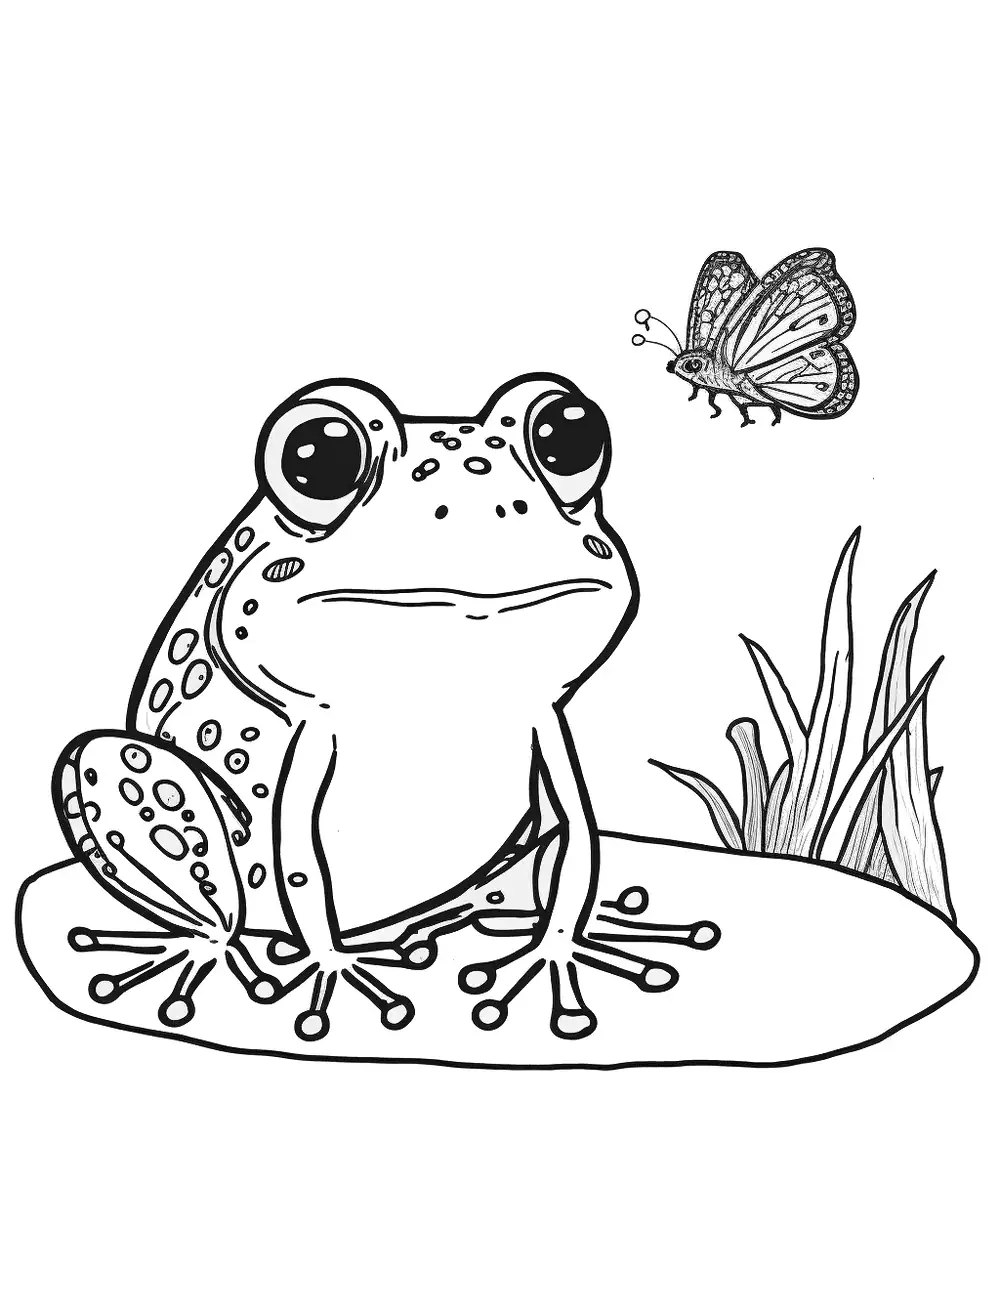 Frog and Butterfly Coloring Page - A frog and a butterfly, with the butterfly landing on the frog’s nose.